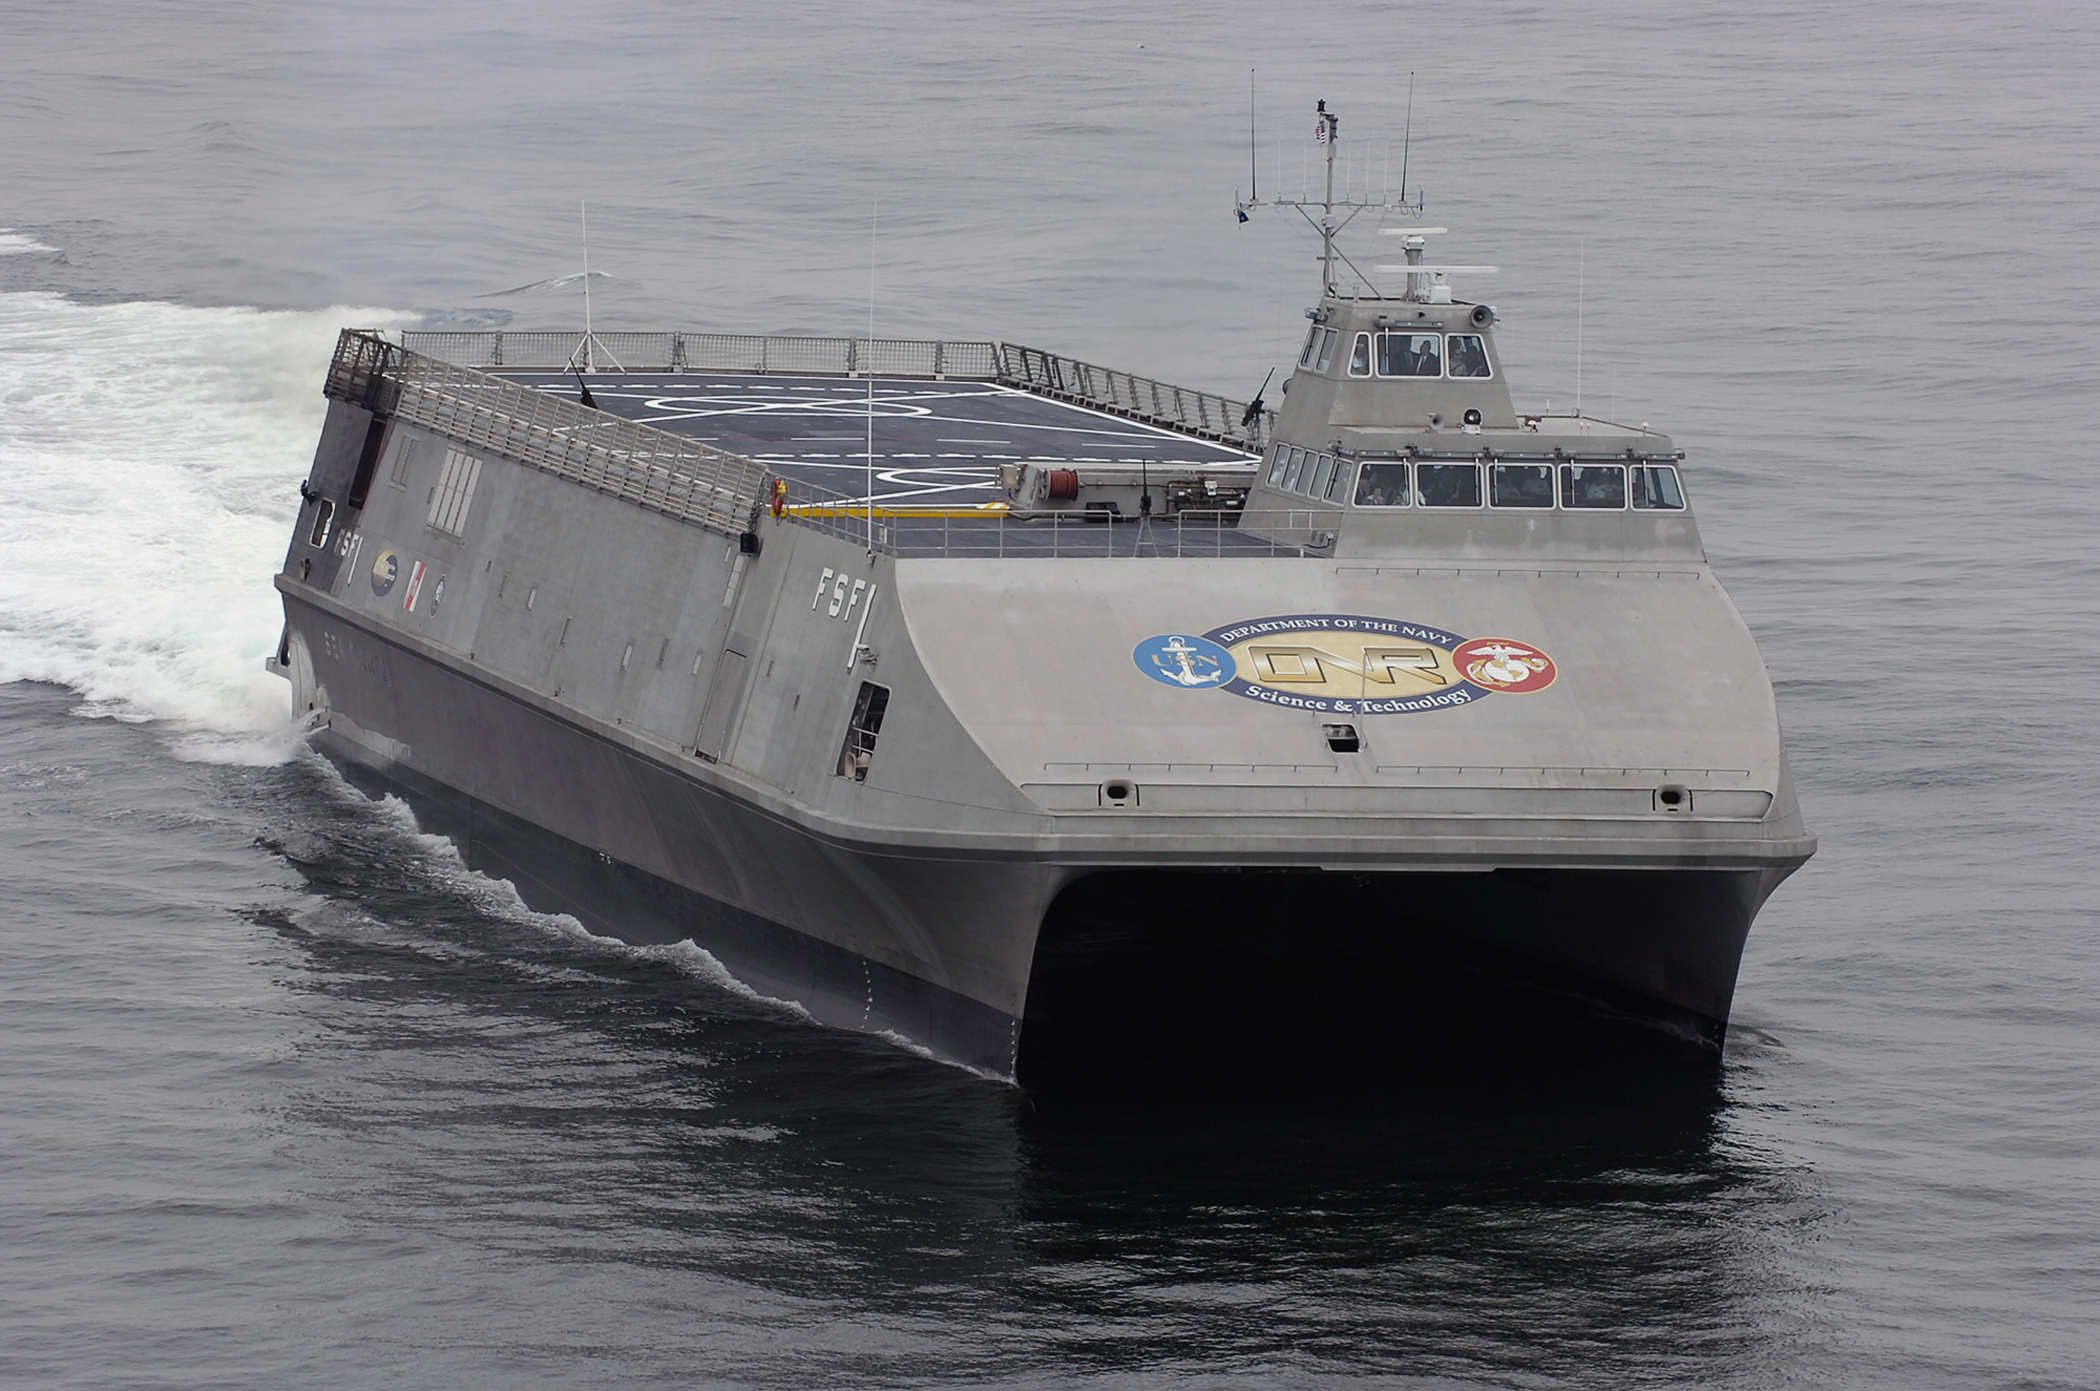   SAN DIEGO, Calif.  - The U.S. Navy's Littoral Surface Craft-Experimental (X-Craft), developed by the Office of Naval Research and christened Sea Fighter (FSF-1), arrives at her new homeport of San Diego, Calif. This high-speed aluminum catamaran wi